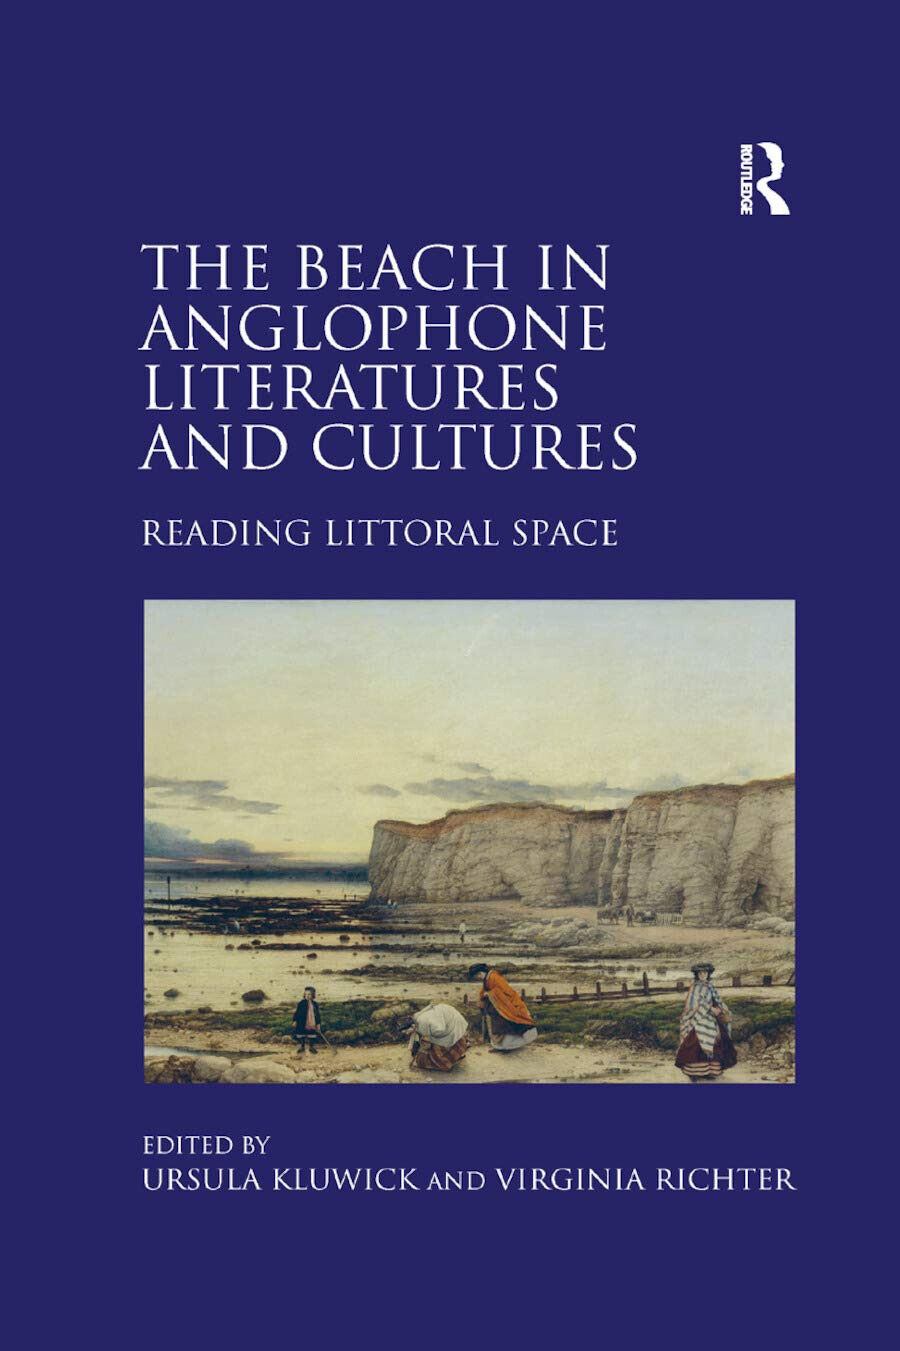 The Beach In Anglophone Literatures And Cultures - Ursula Kluwick - 2019 libro usato